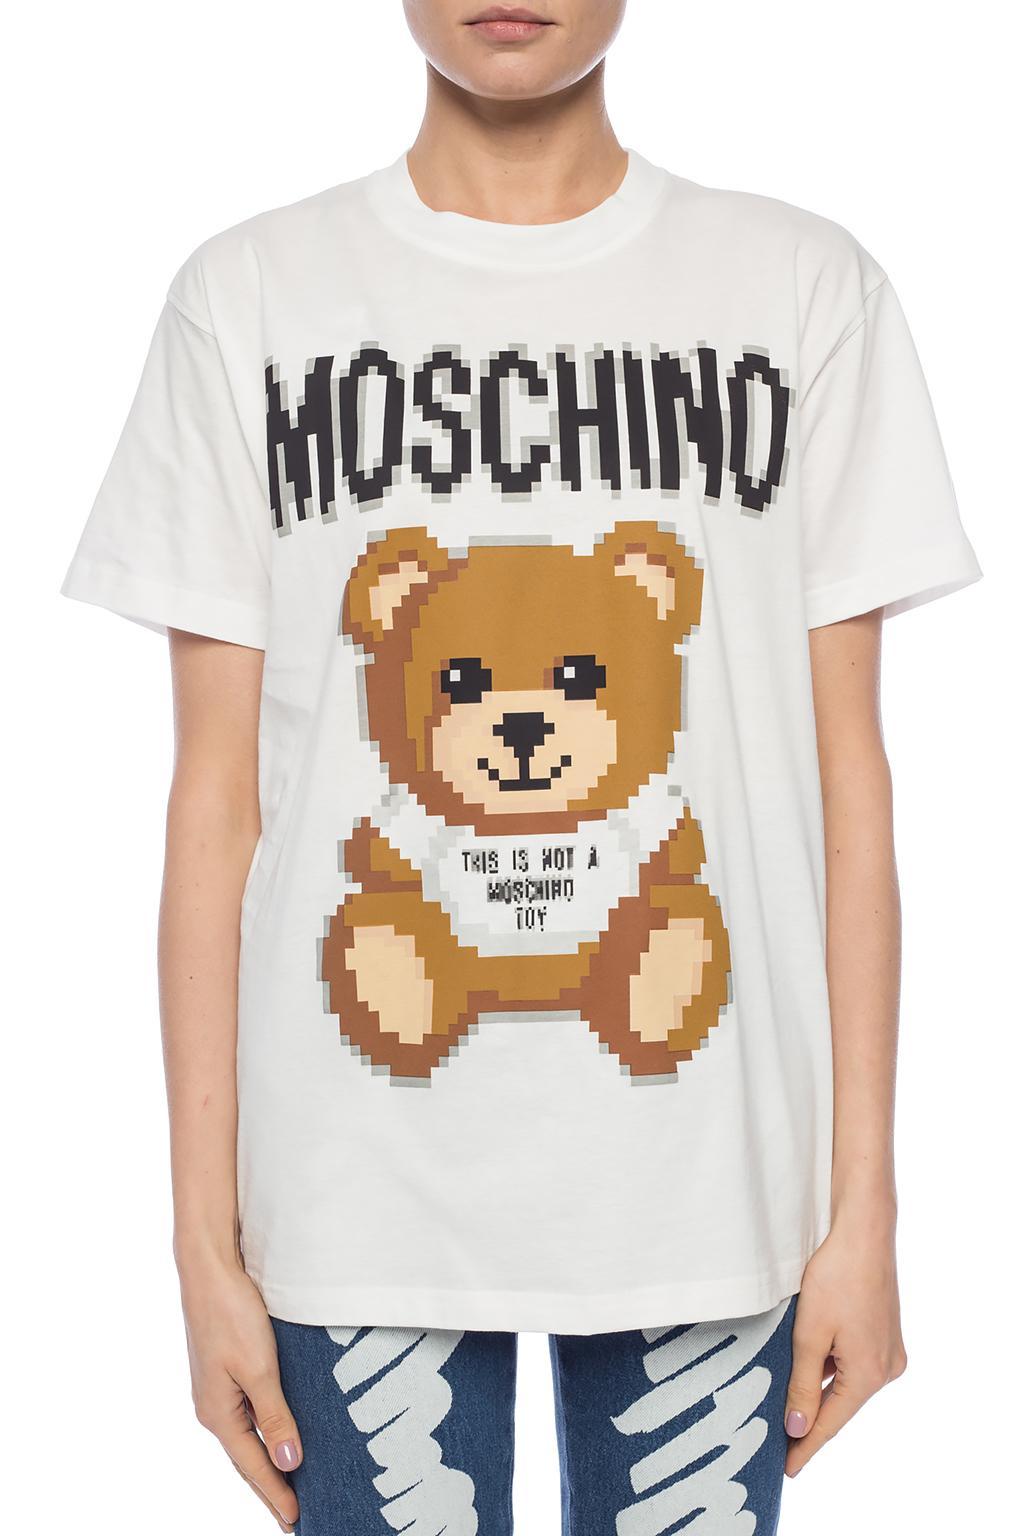 Moschino Printed Teddy Bear T-shirt in White - Lyst